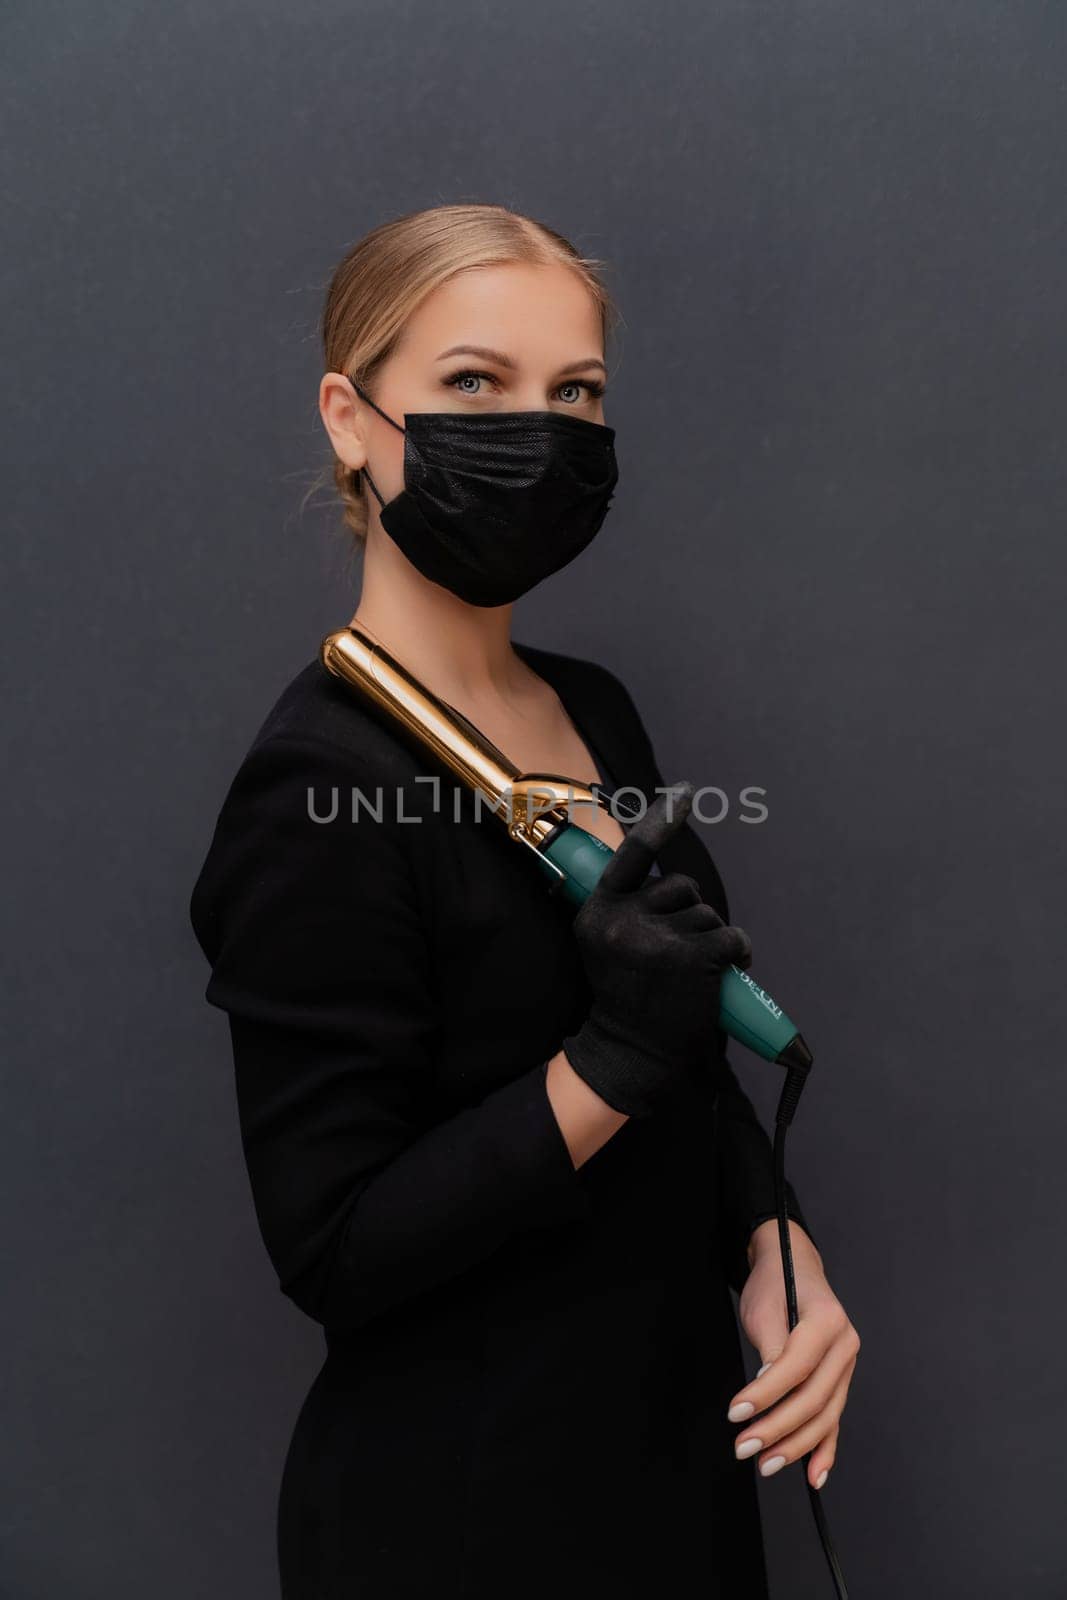 A woman in a black dress holding a hair curler. She is wearing a mask. Concept of caution and responsibility in the face of a pandemic